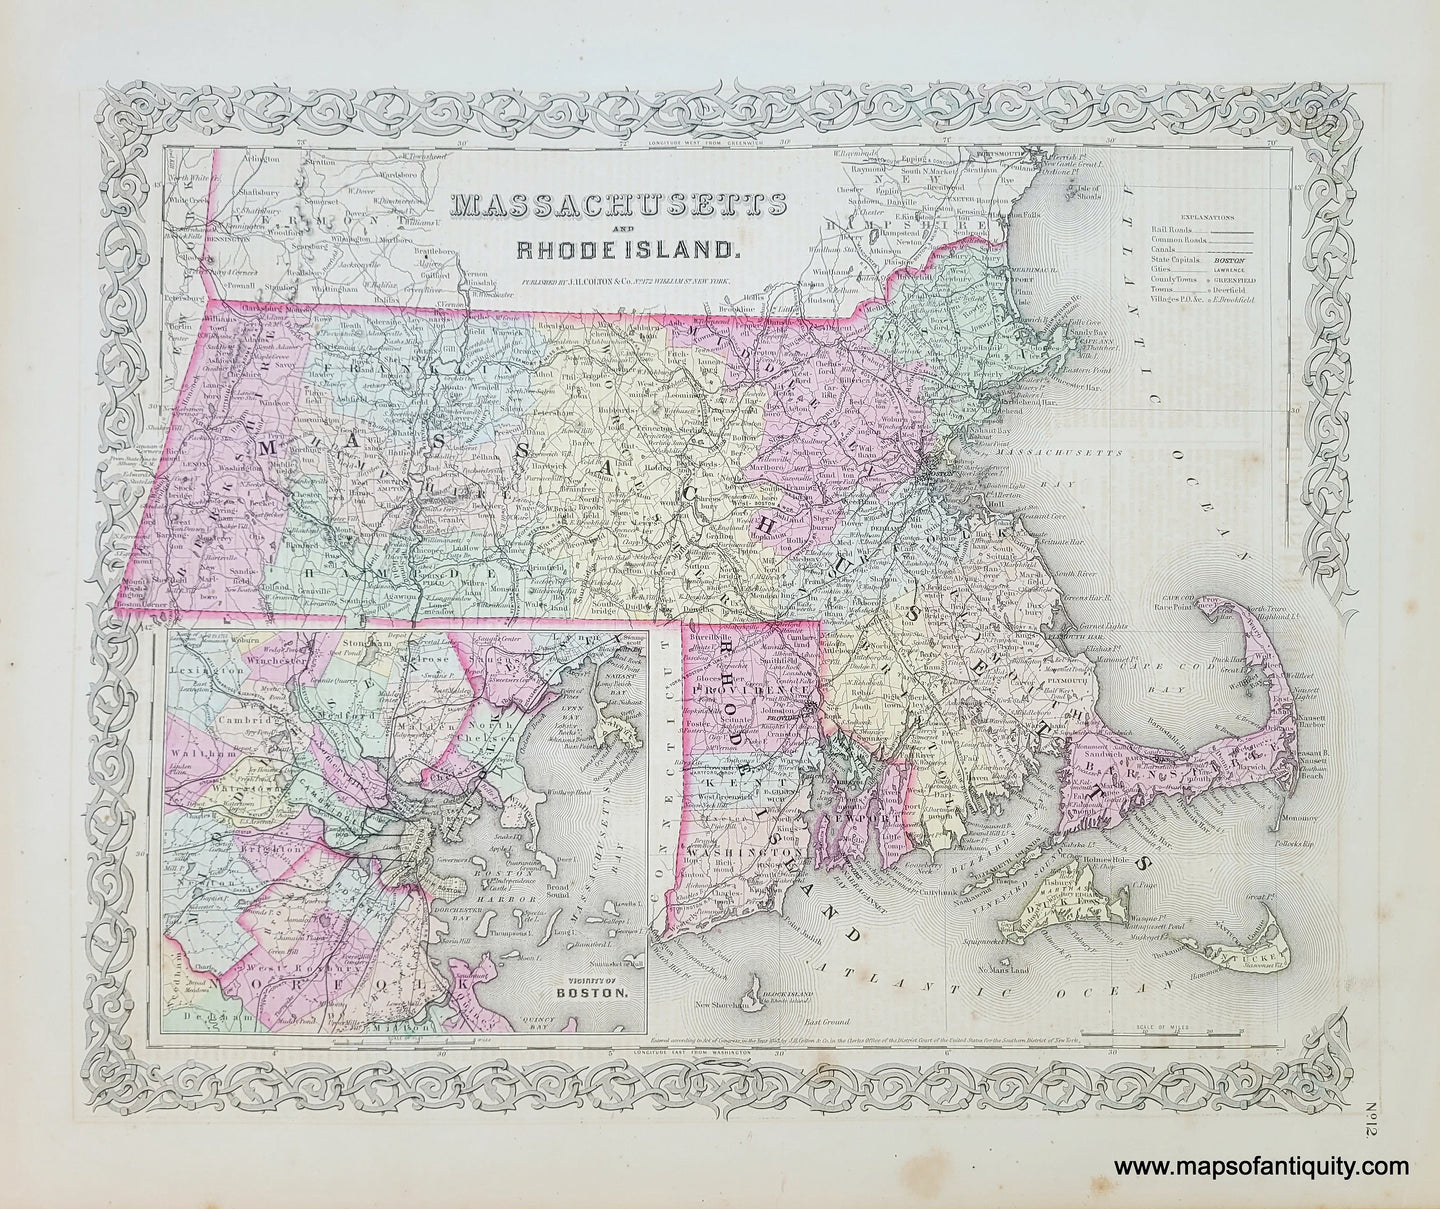 Genuine-Antique-Map-Massachusetts-and-Rhode-Island-1859-Colton-Maps-Of-Antiquity